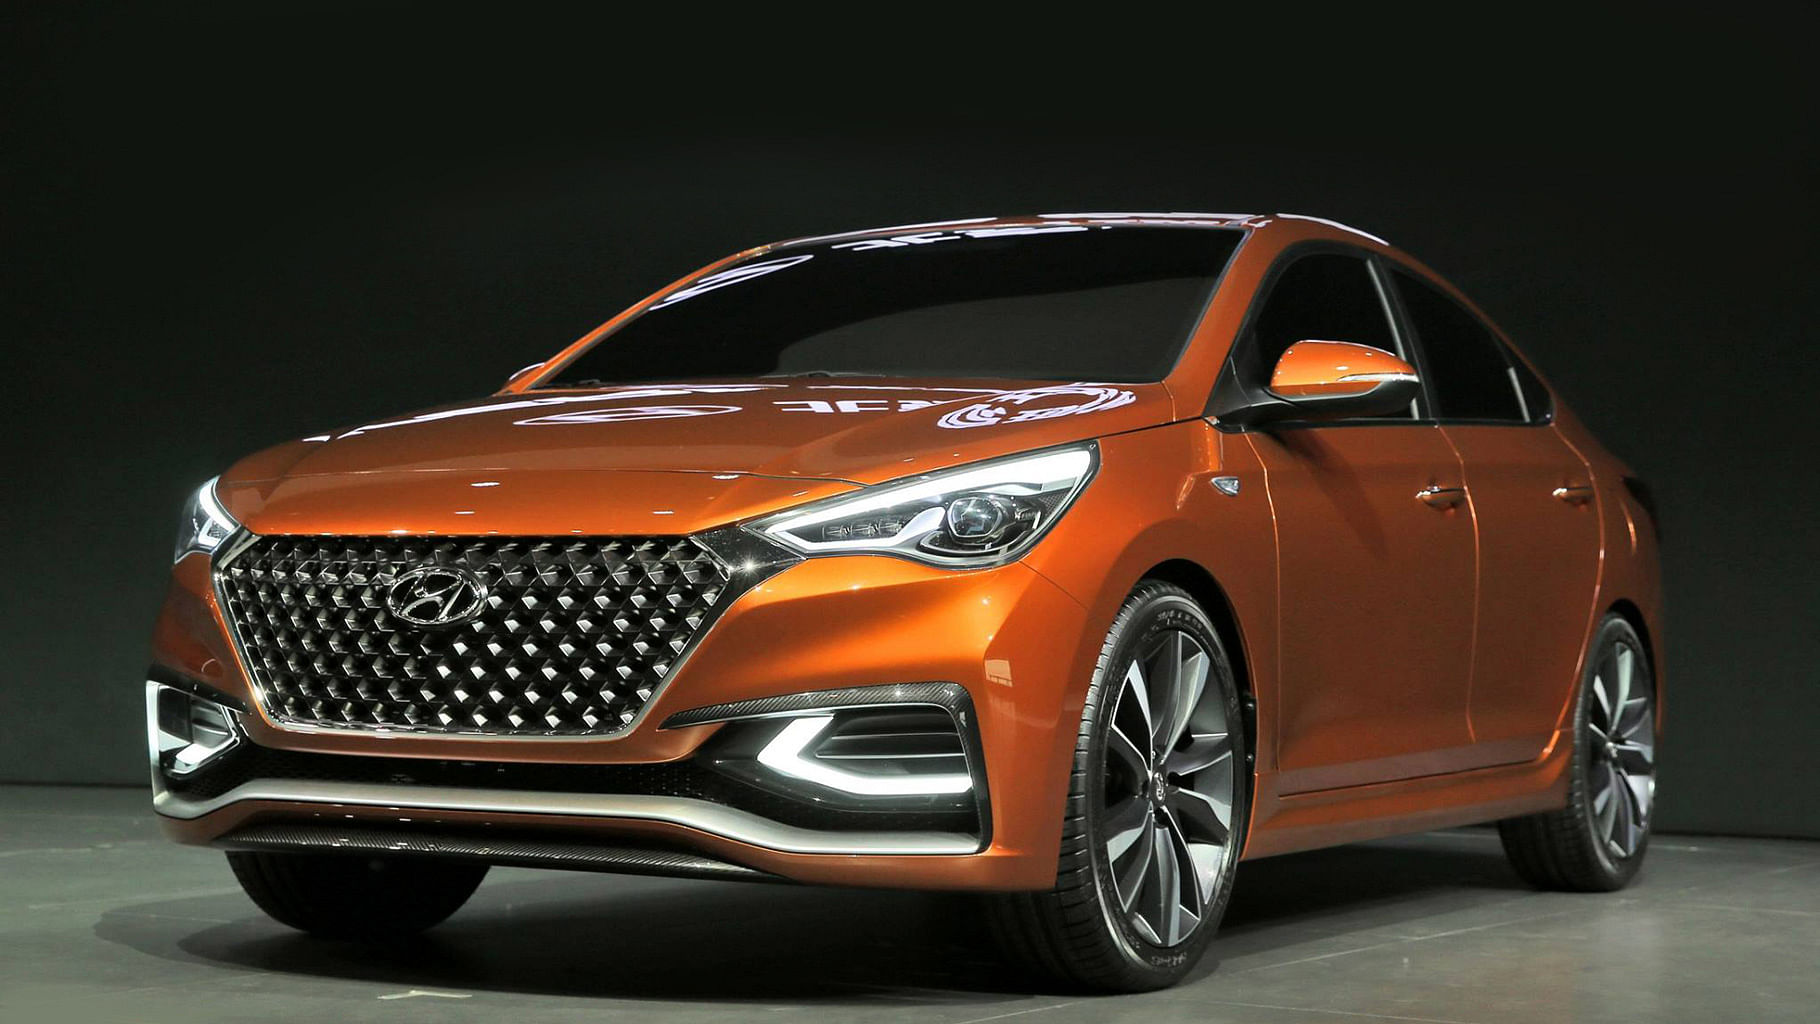 2017 Hyundai Verna Concept. (Photo: Altered by <b>The Quint</b>)